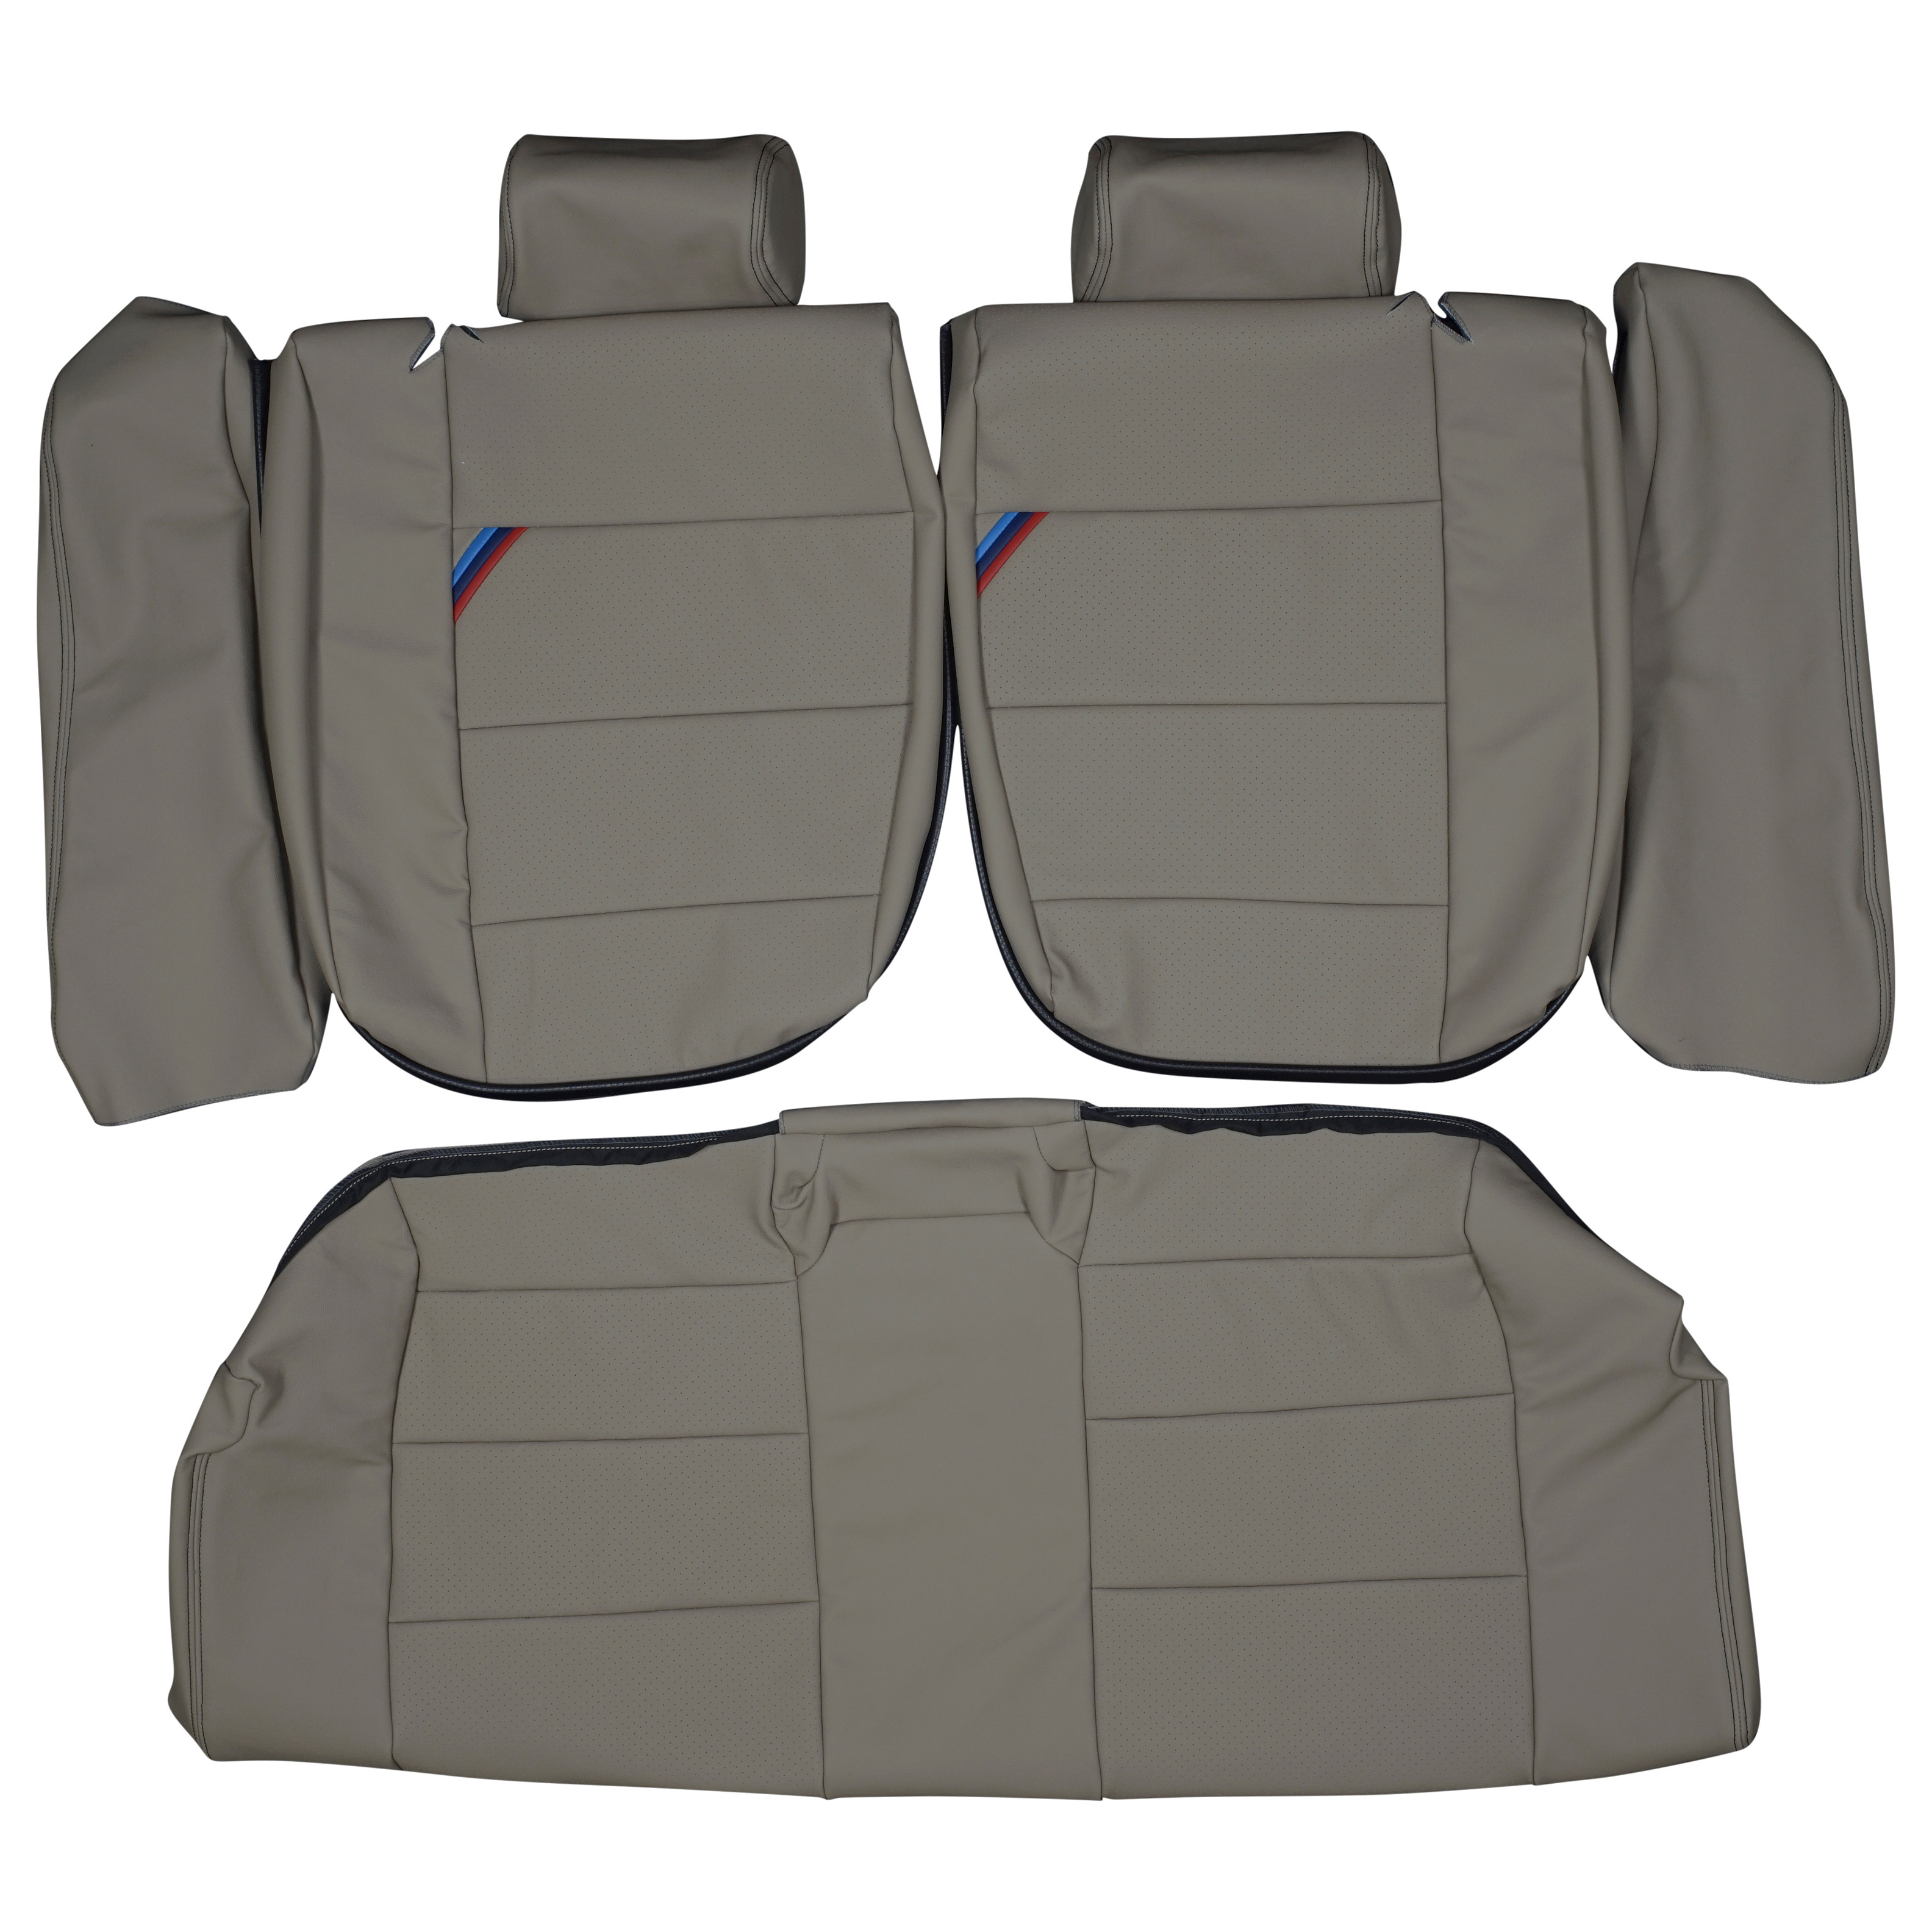 1992-1998 BMW E36 M3 Coupe Custom Real Leather Seat Covers (Rear) -  Lseat.com